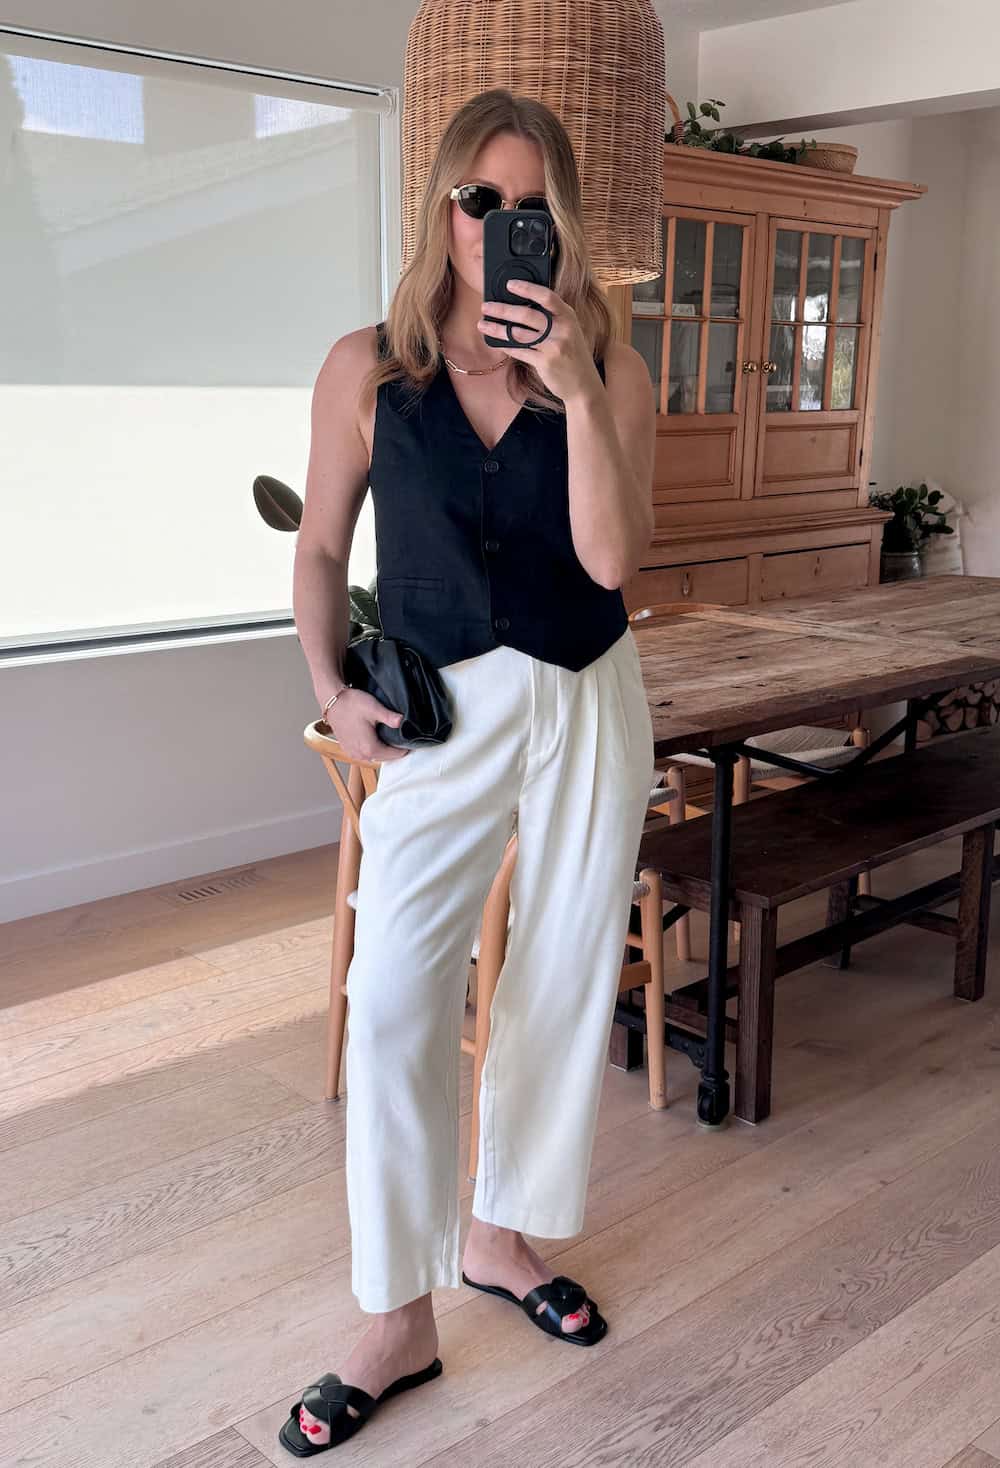 Christal wearing white tailored pants with a black vest top and black sandals.